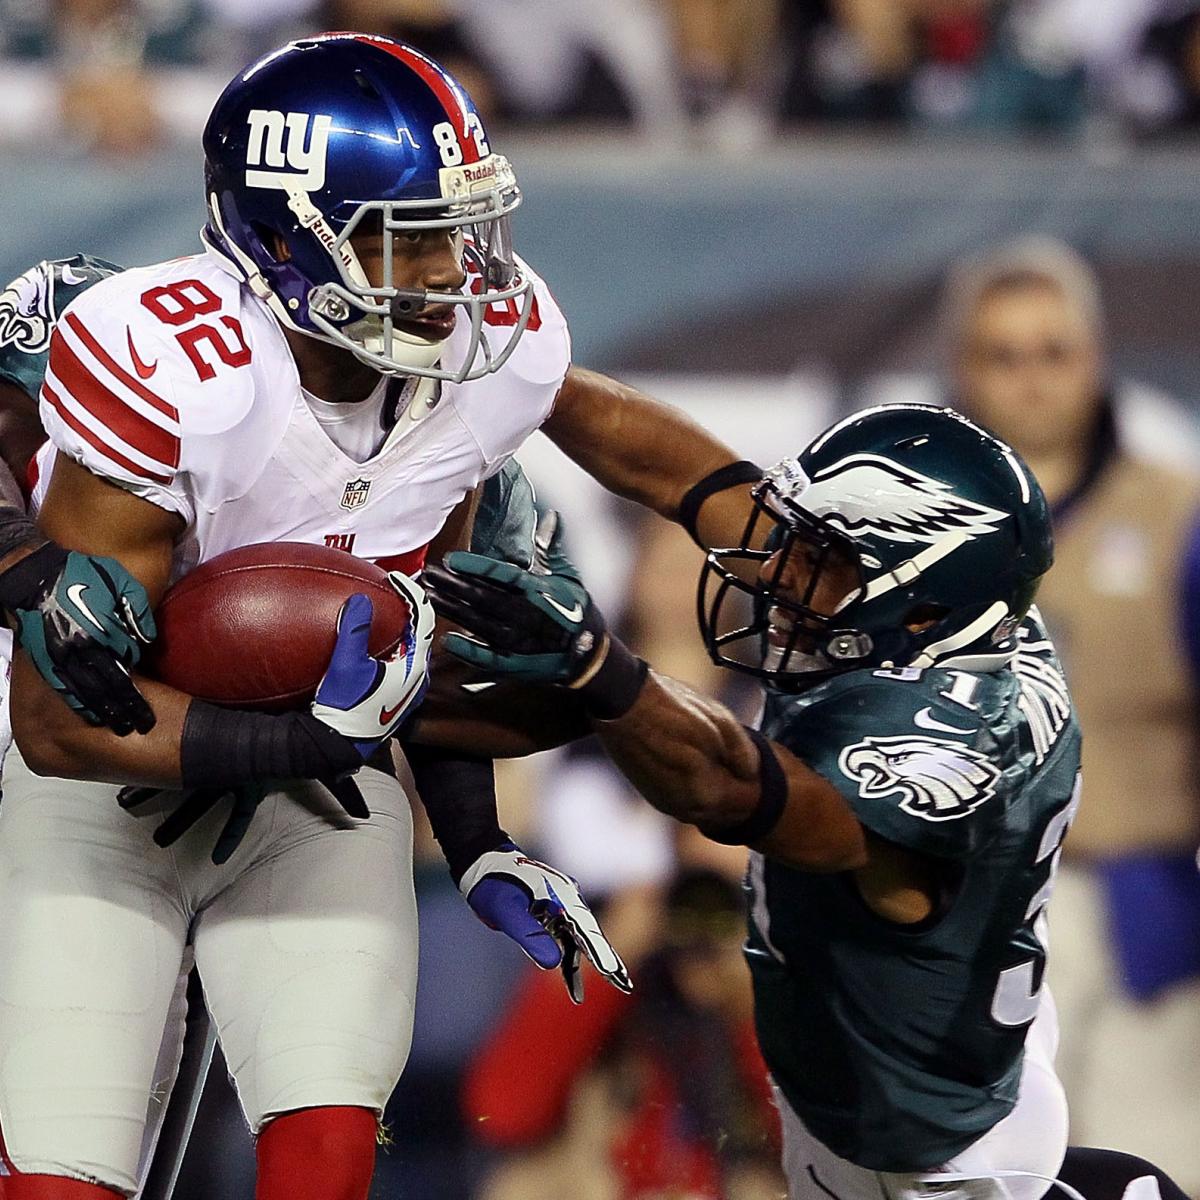 Rueben Randle Why New York's Rookie Receiver Is Not Ready to Make an